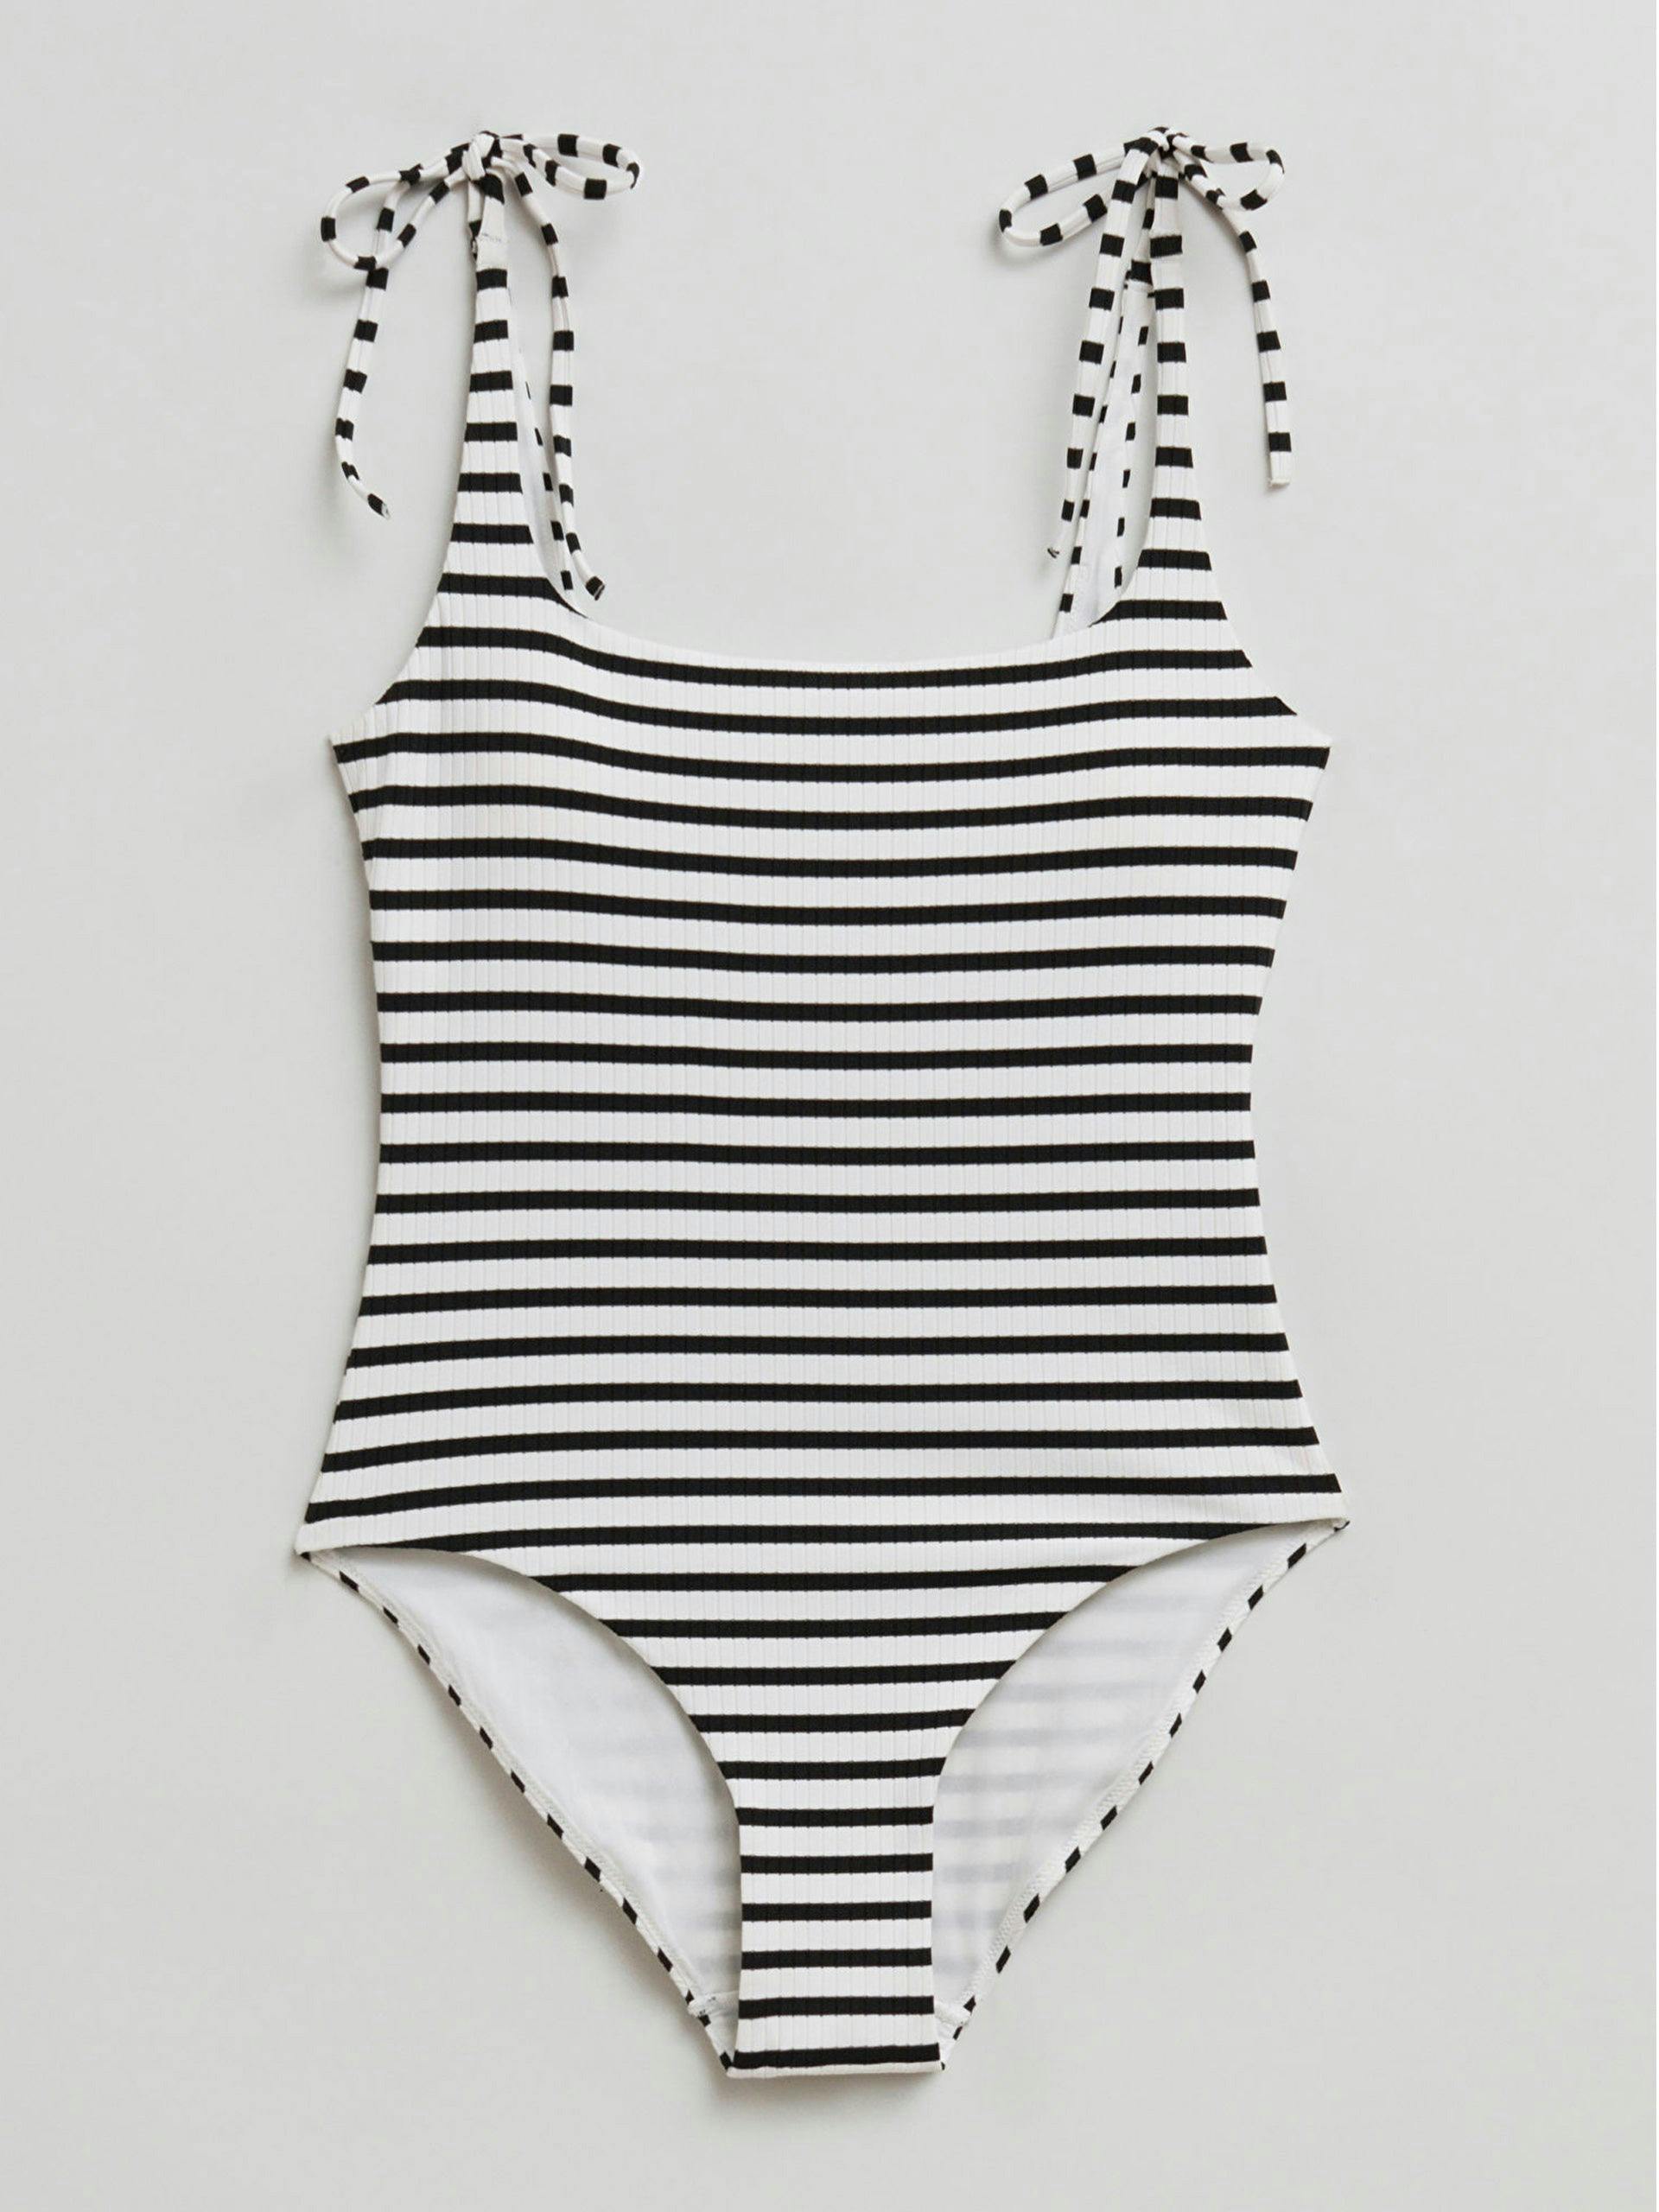 Black and white striped swimsuit